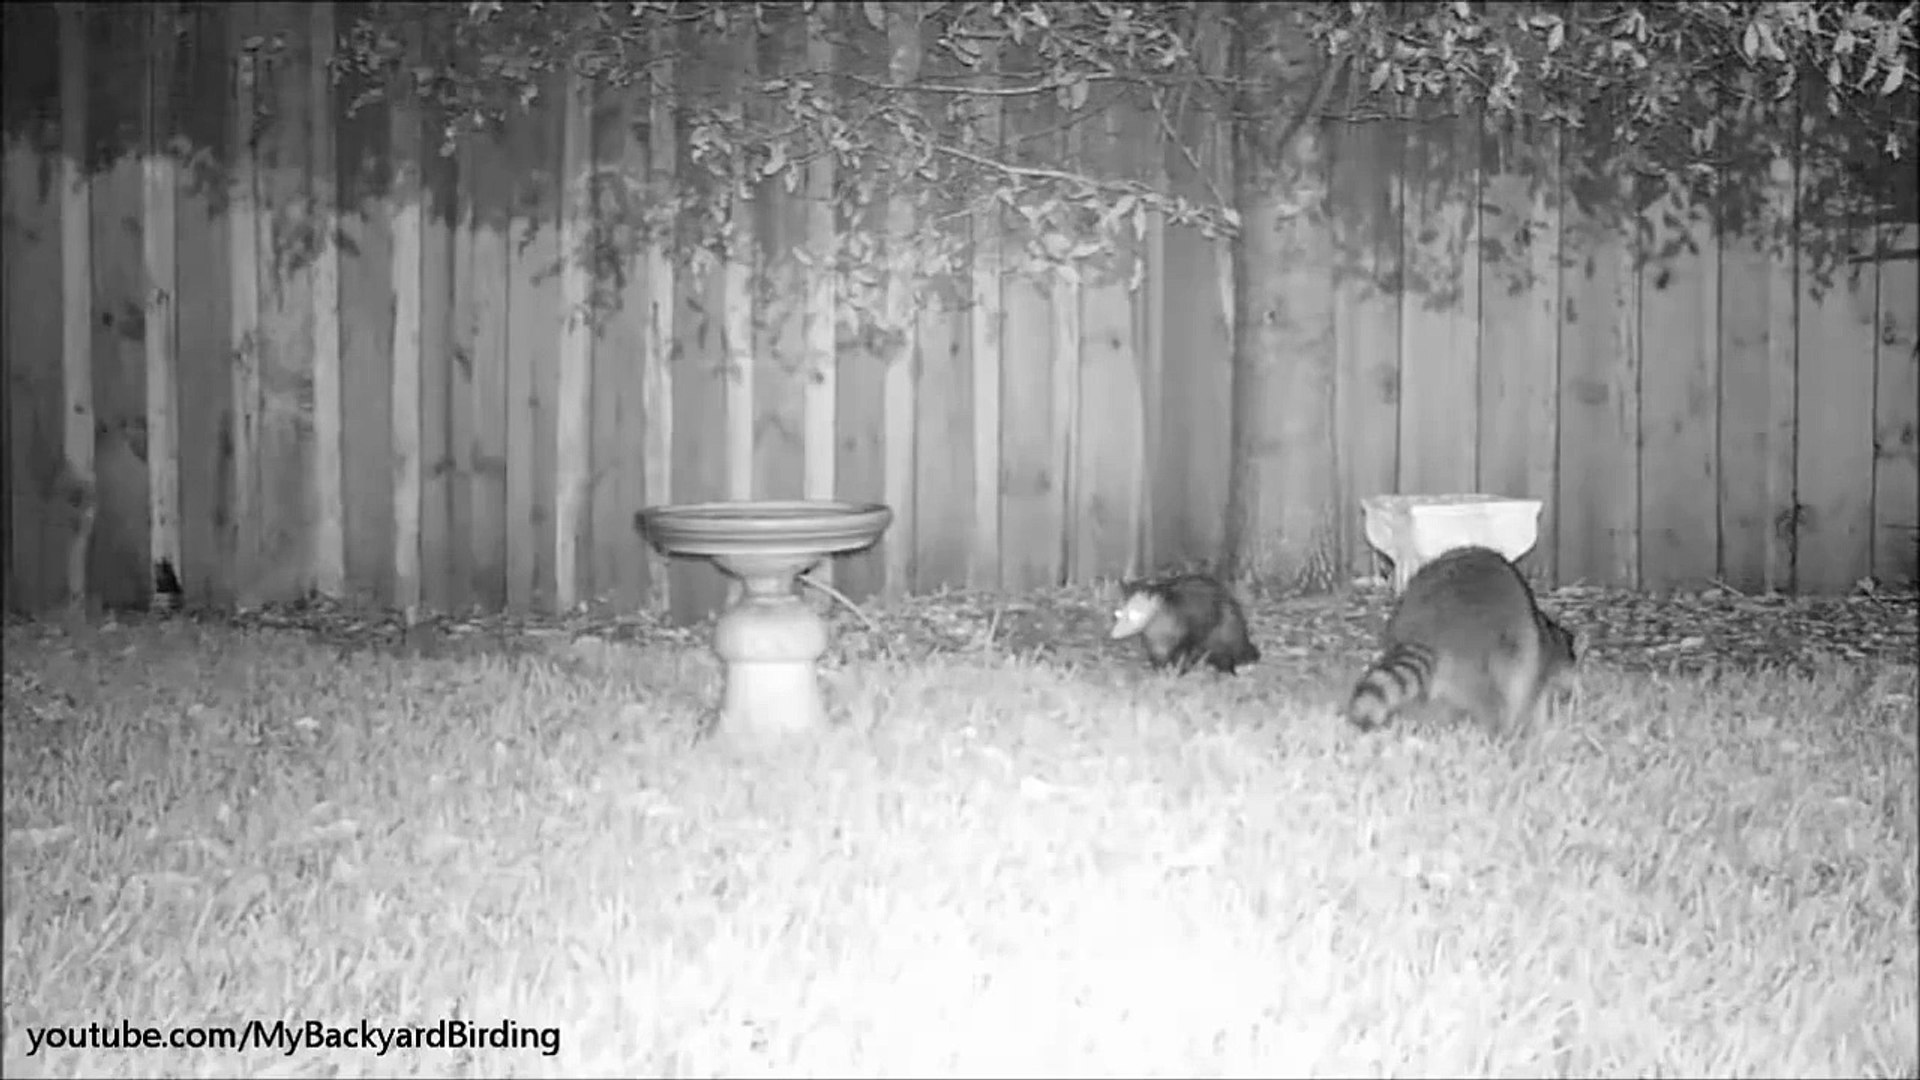 Possum and Raccoon Friends - Flying Armadillo!